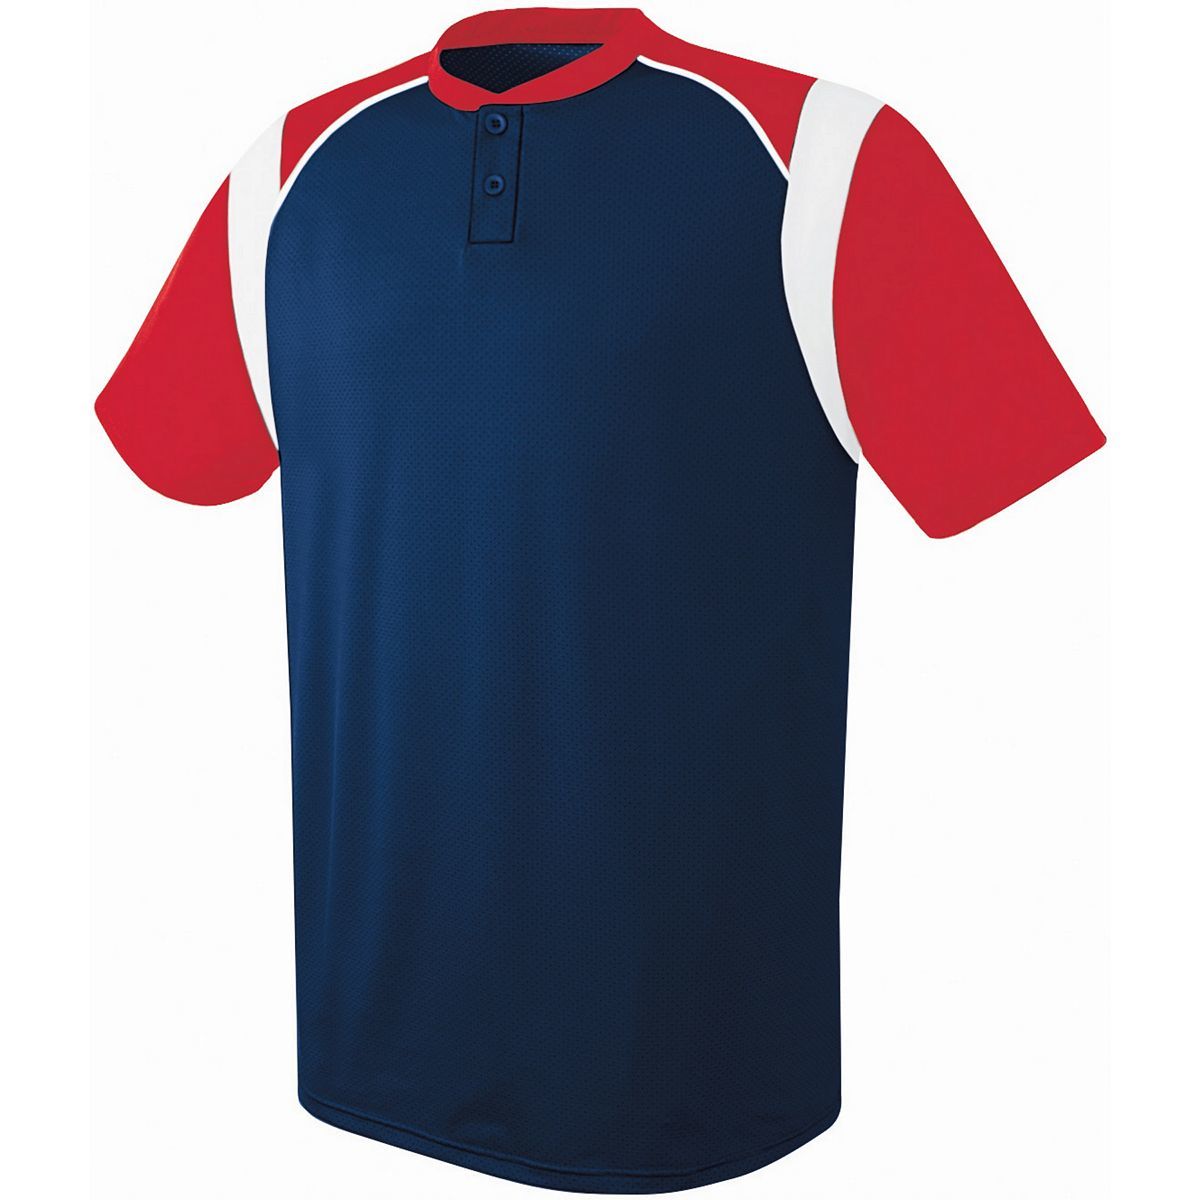 Augusta Sportswear Youth Wildcard Two-Button Jersey in Navy/Scarlet/White  -Part of the Youth, Youth-Jersey, Augusta-Products, Baseball, Shirts, All-Sports, All-Sports-1 product lines at KanaleyCreations.com